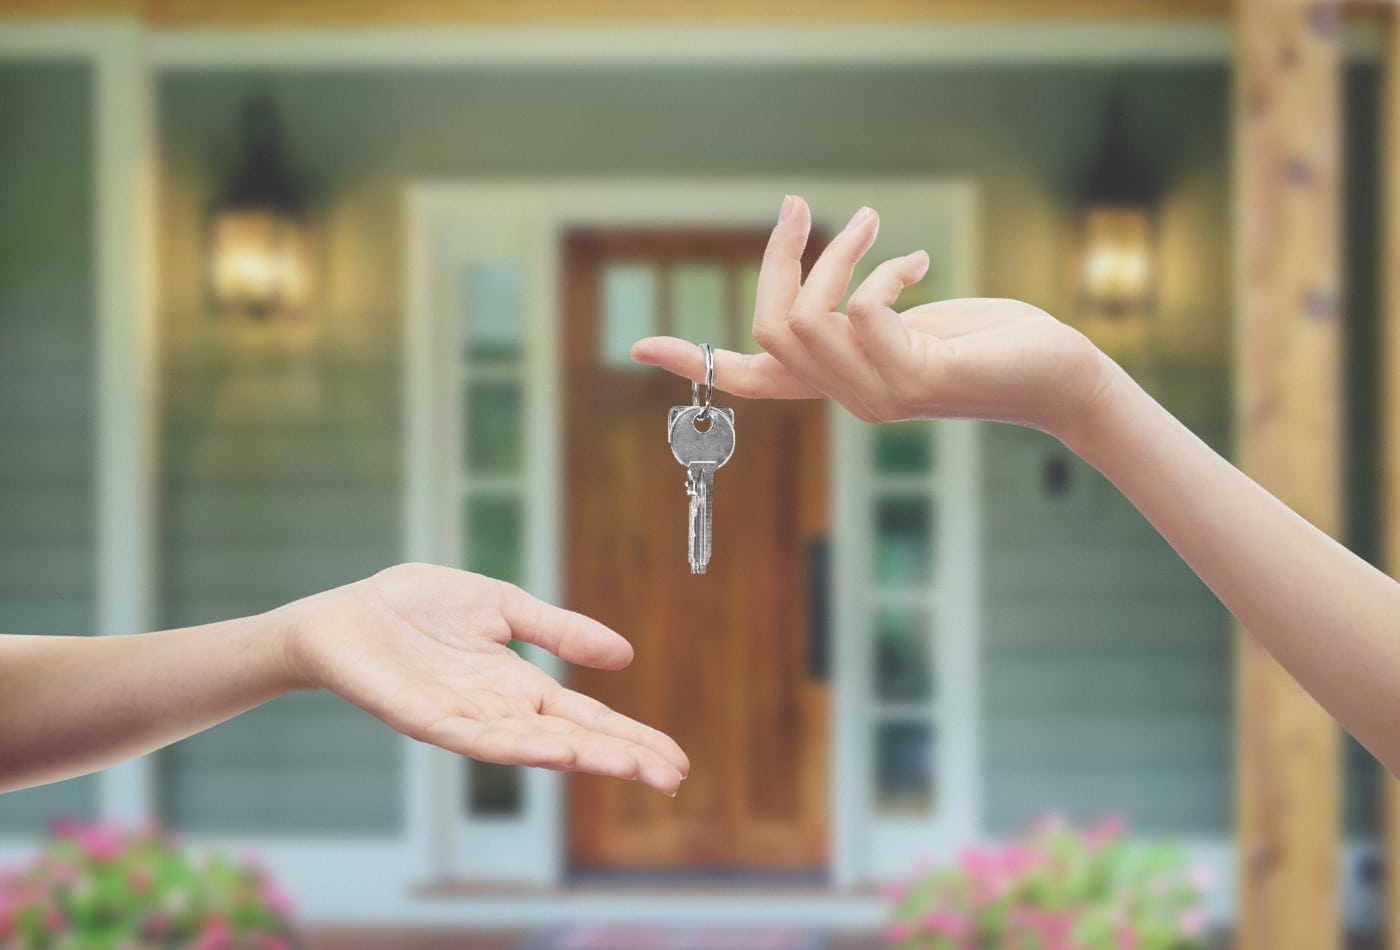 house key exchanging hands in front of home background